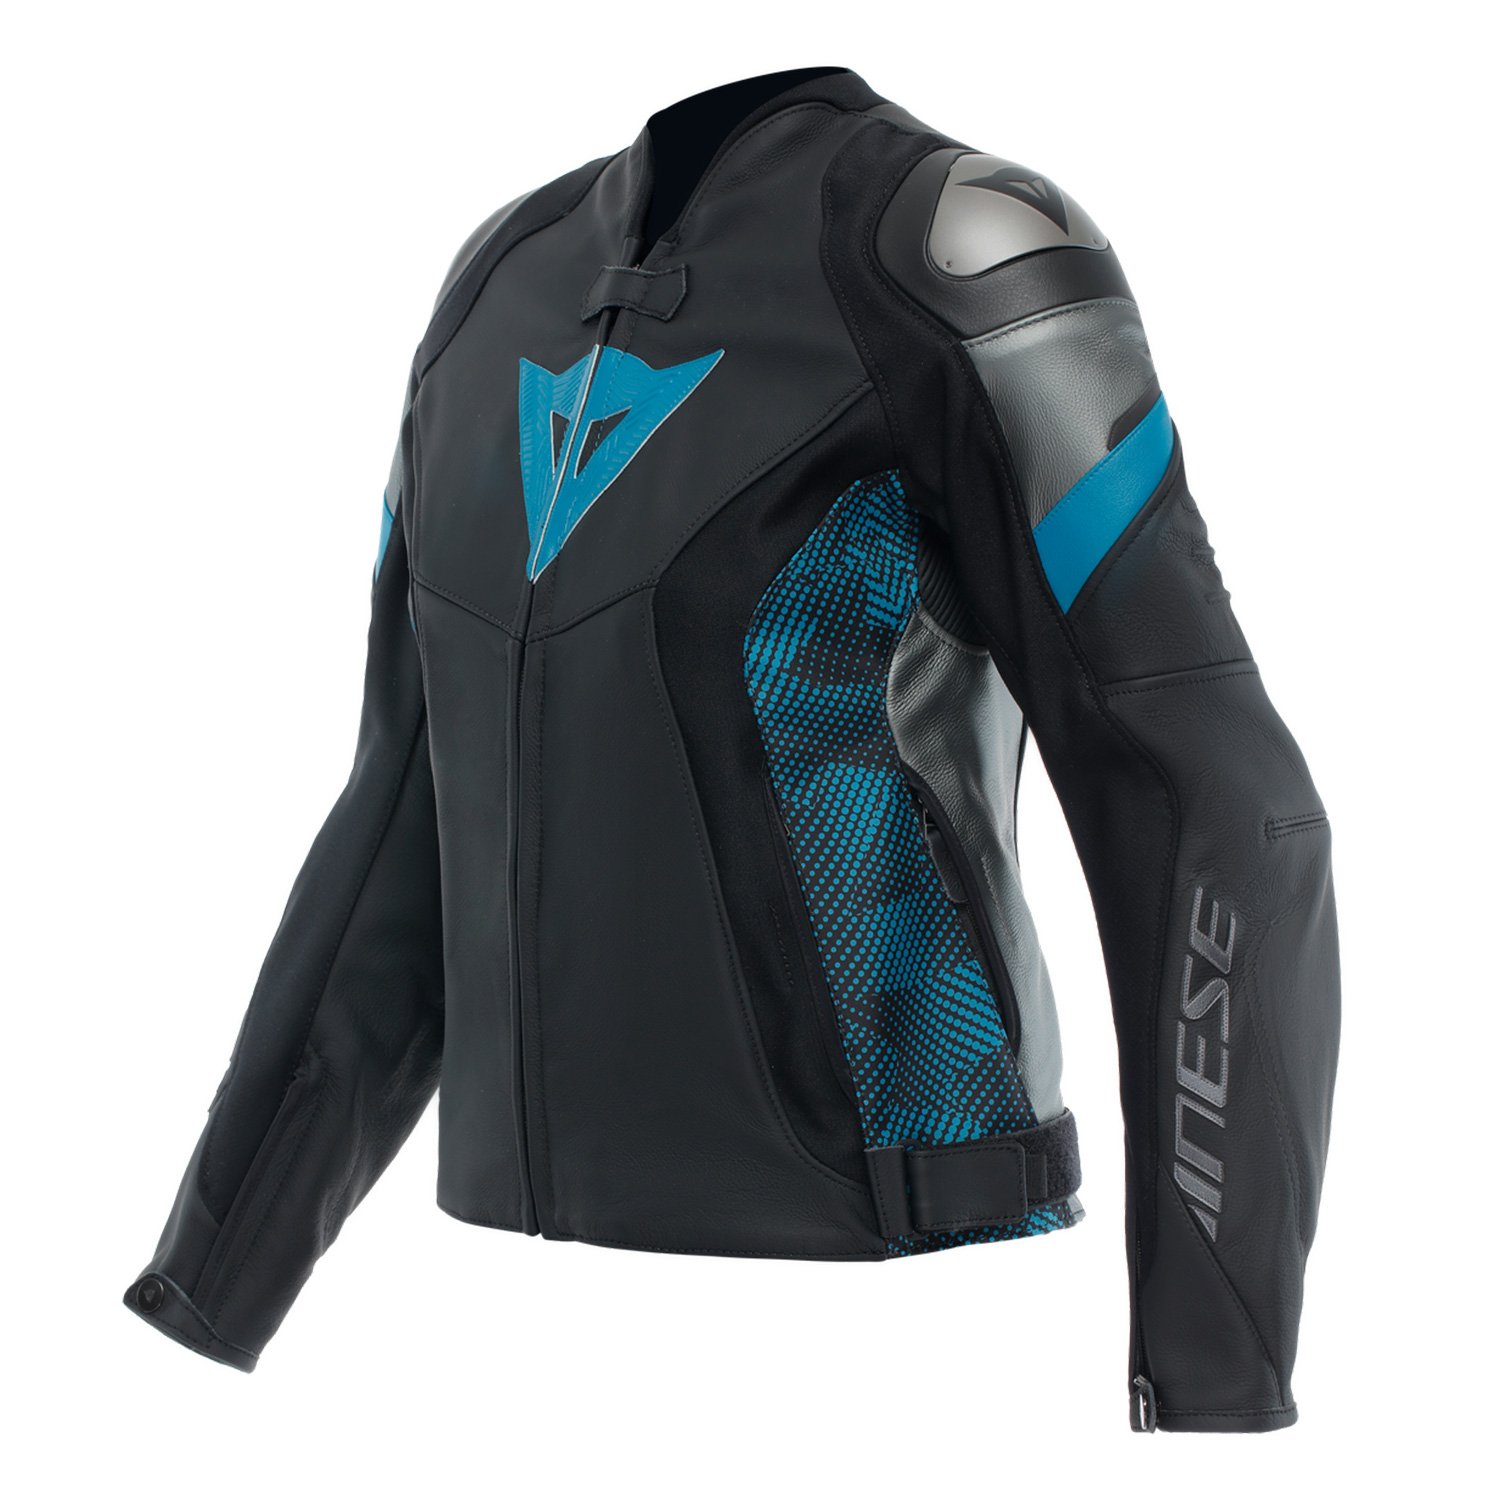 Image of Dainese Avro 5 Leather Jacket WMN Black Teal Anthracite Größe 46